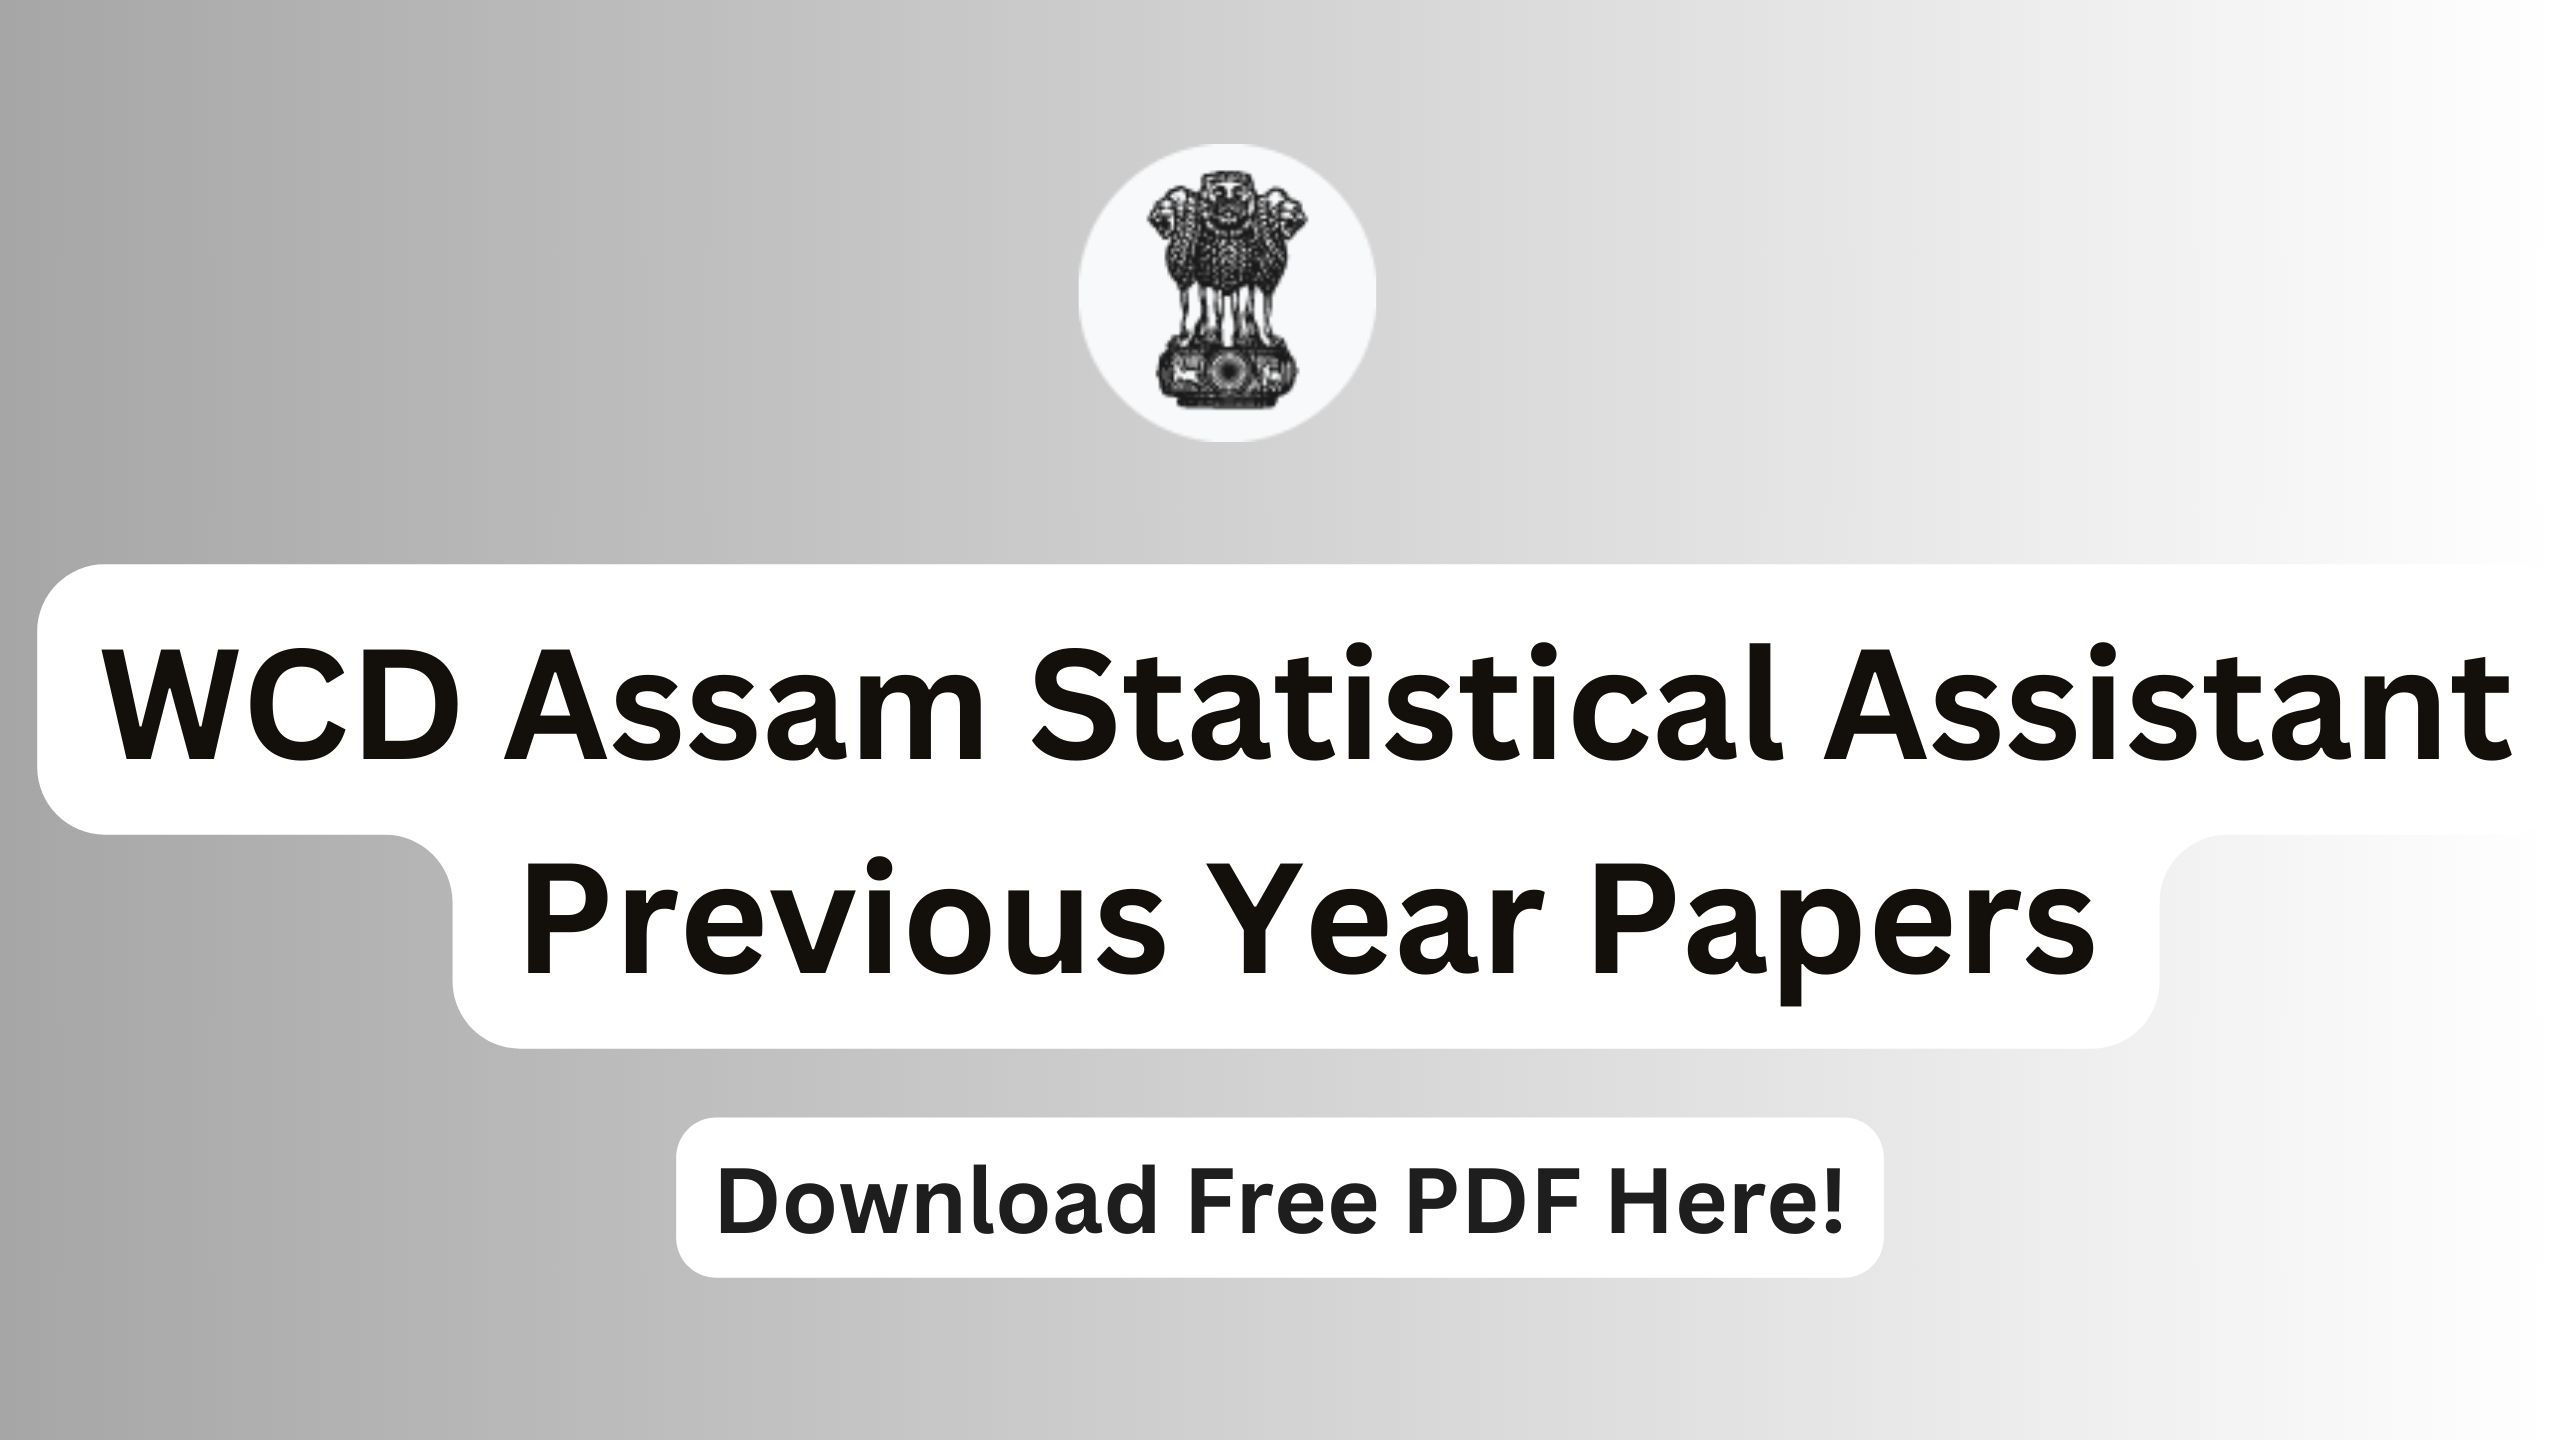 WCD Assam Statistical Assistant Previous Year Papers